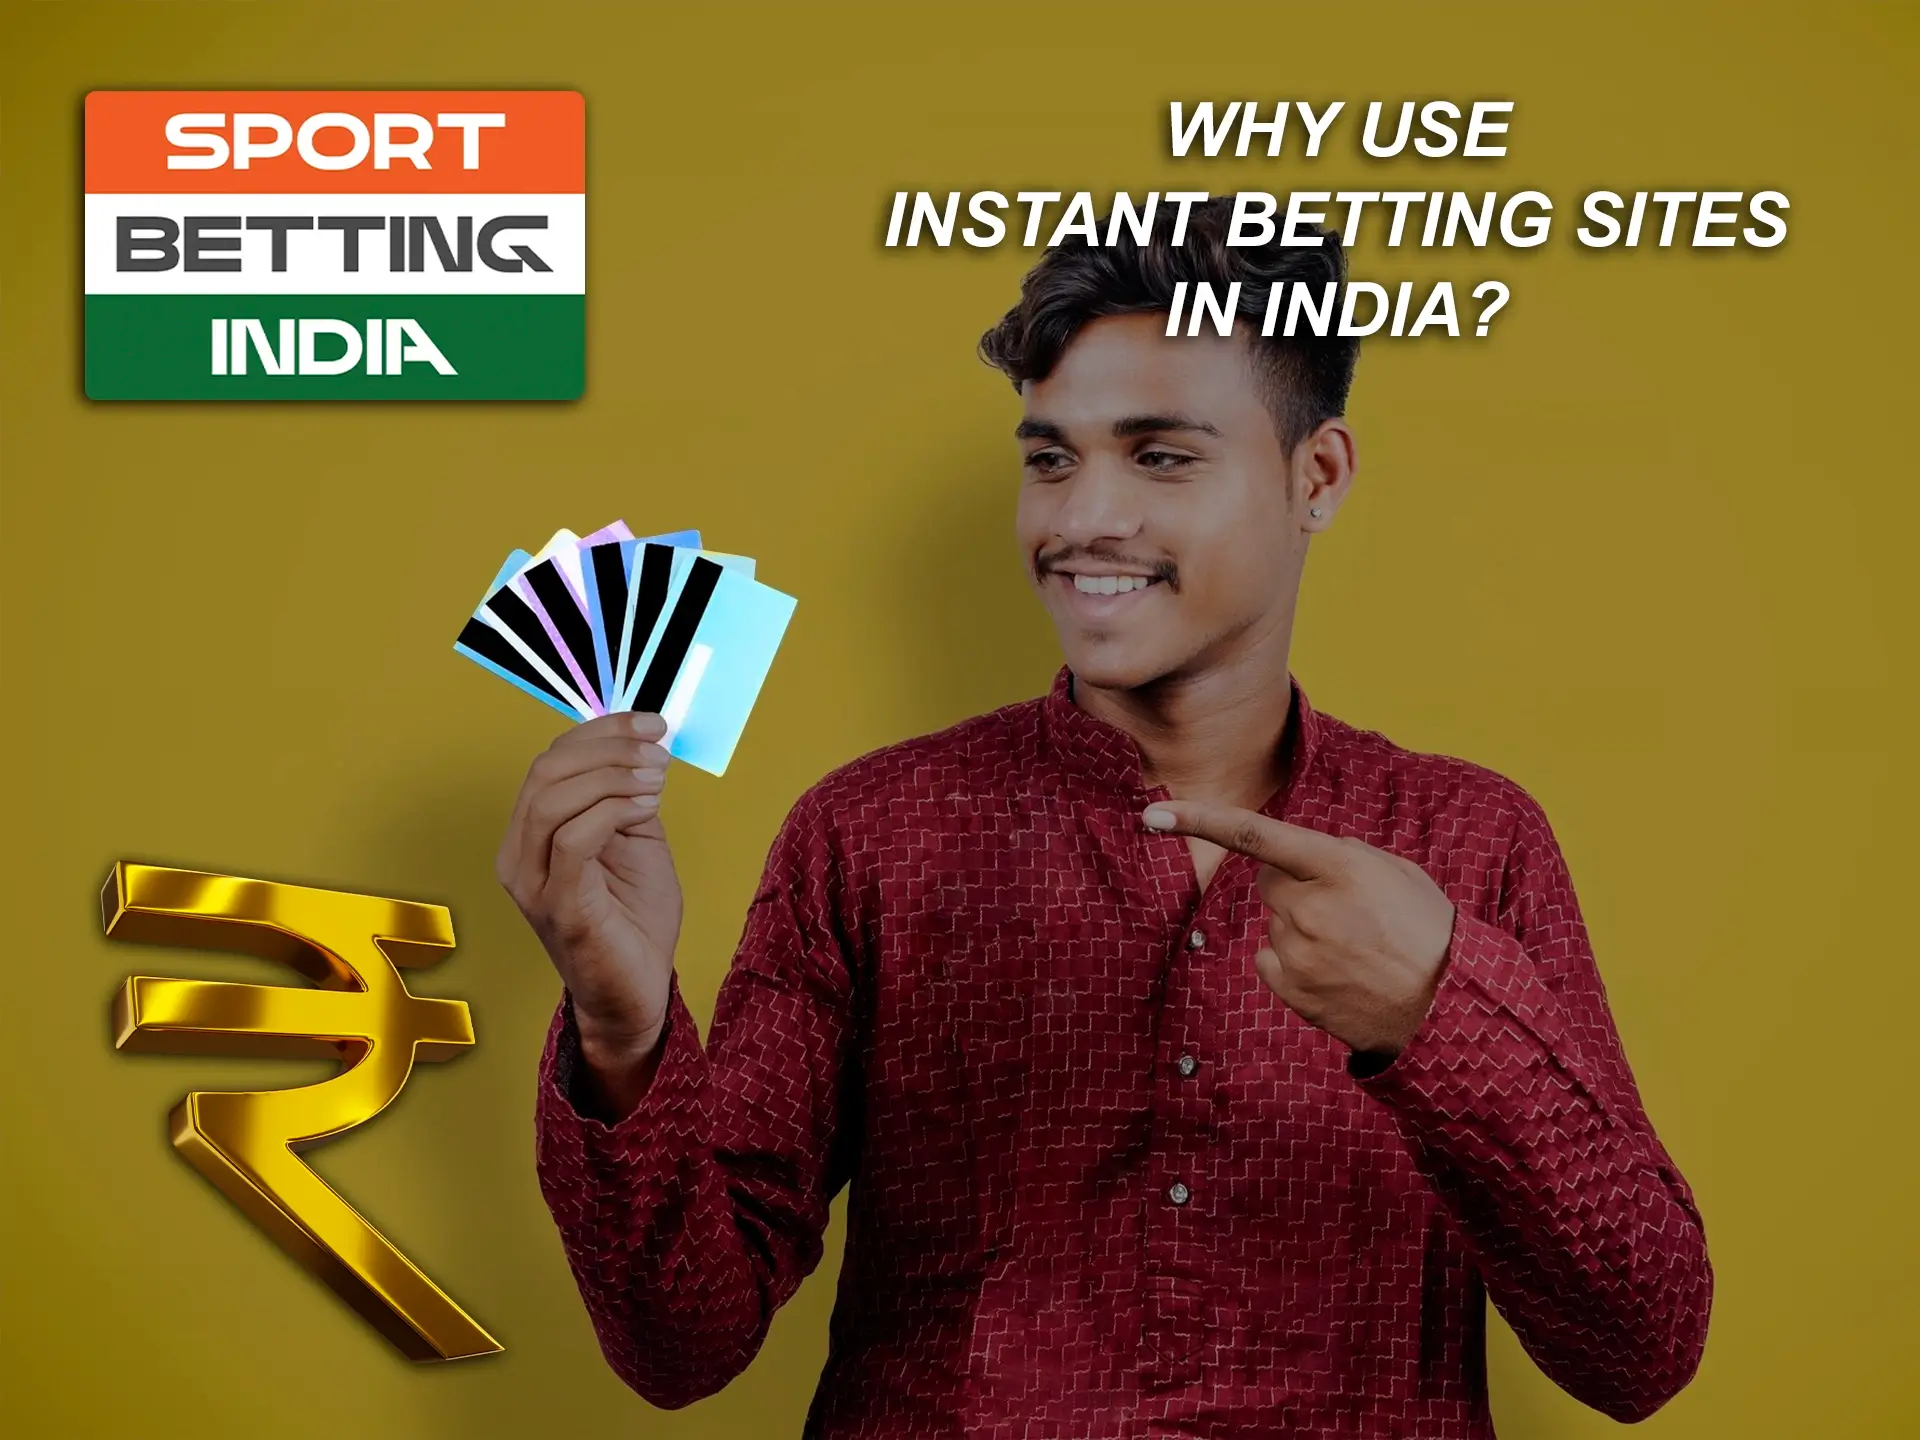 Everyone loves fast money so choose the best casino from the list provided at SportBettingIndia.